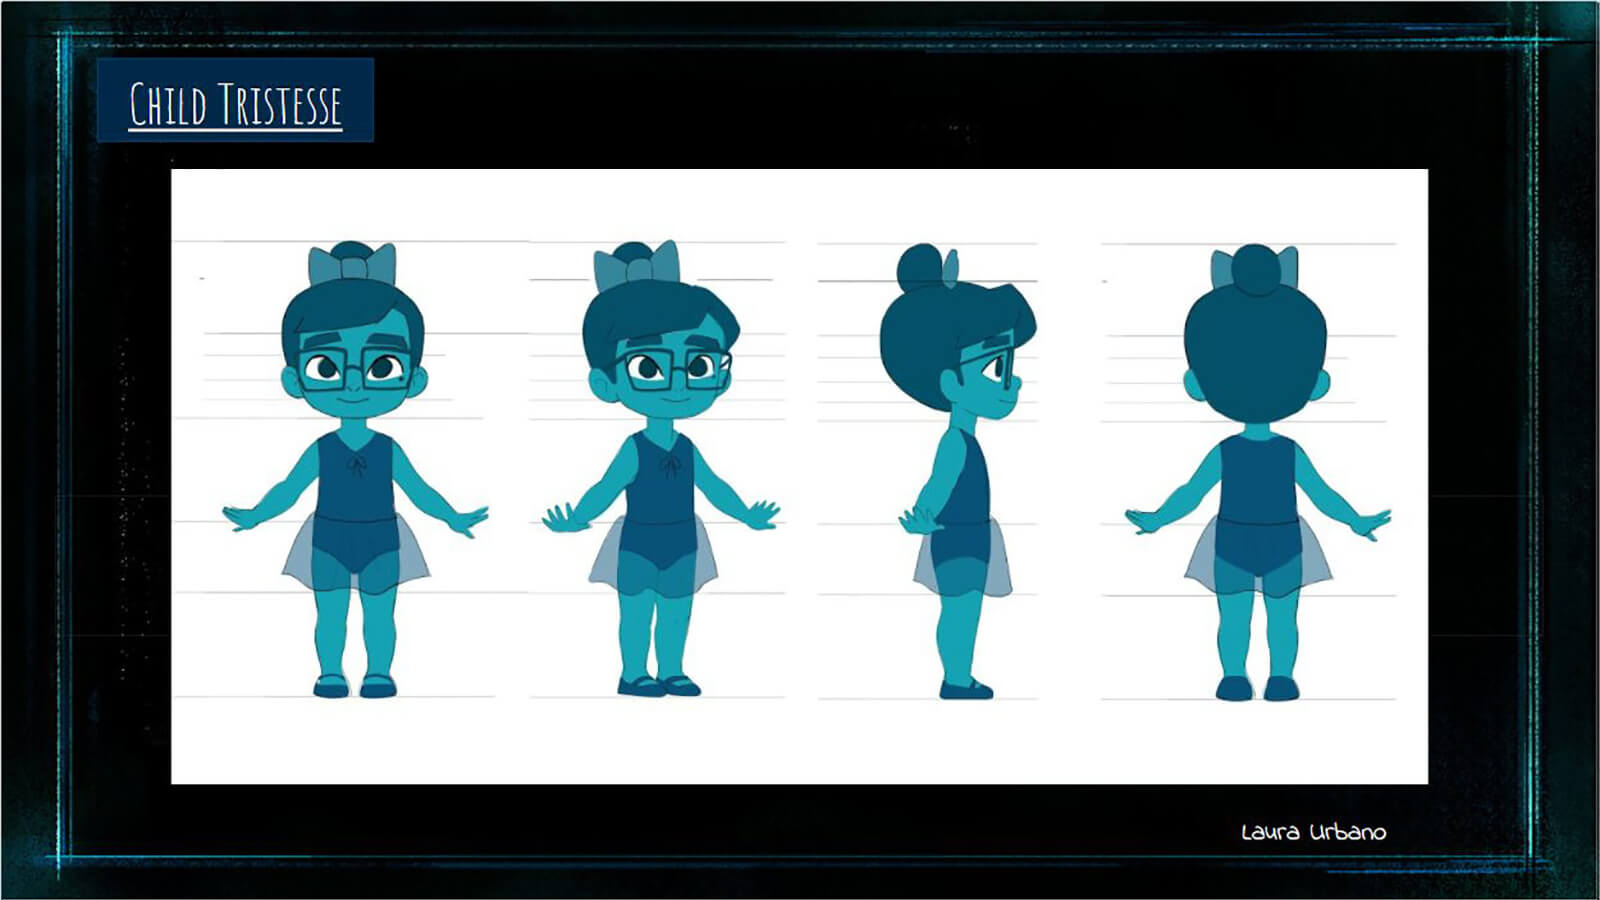 A character turn sheet for the turquoise child version of the film's main character Tristesse.